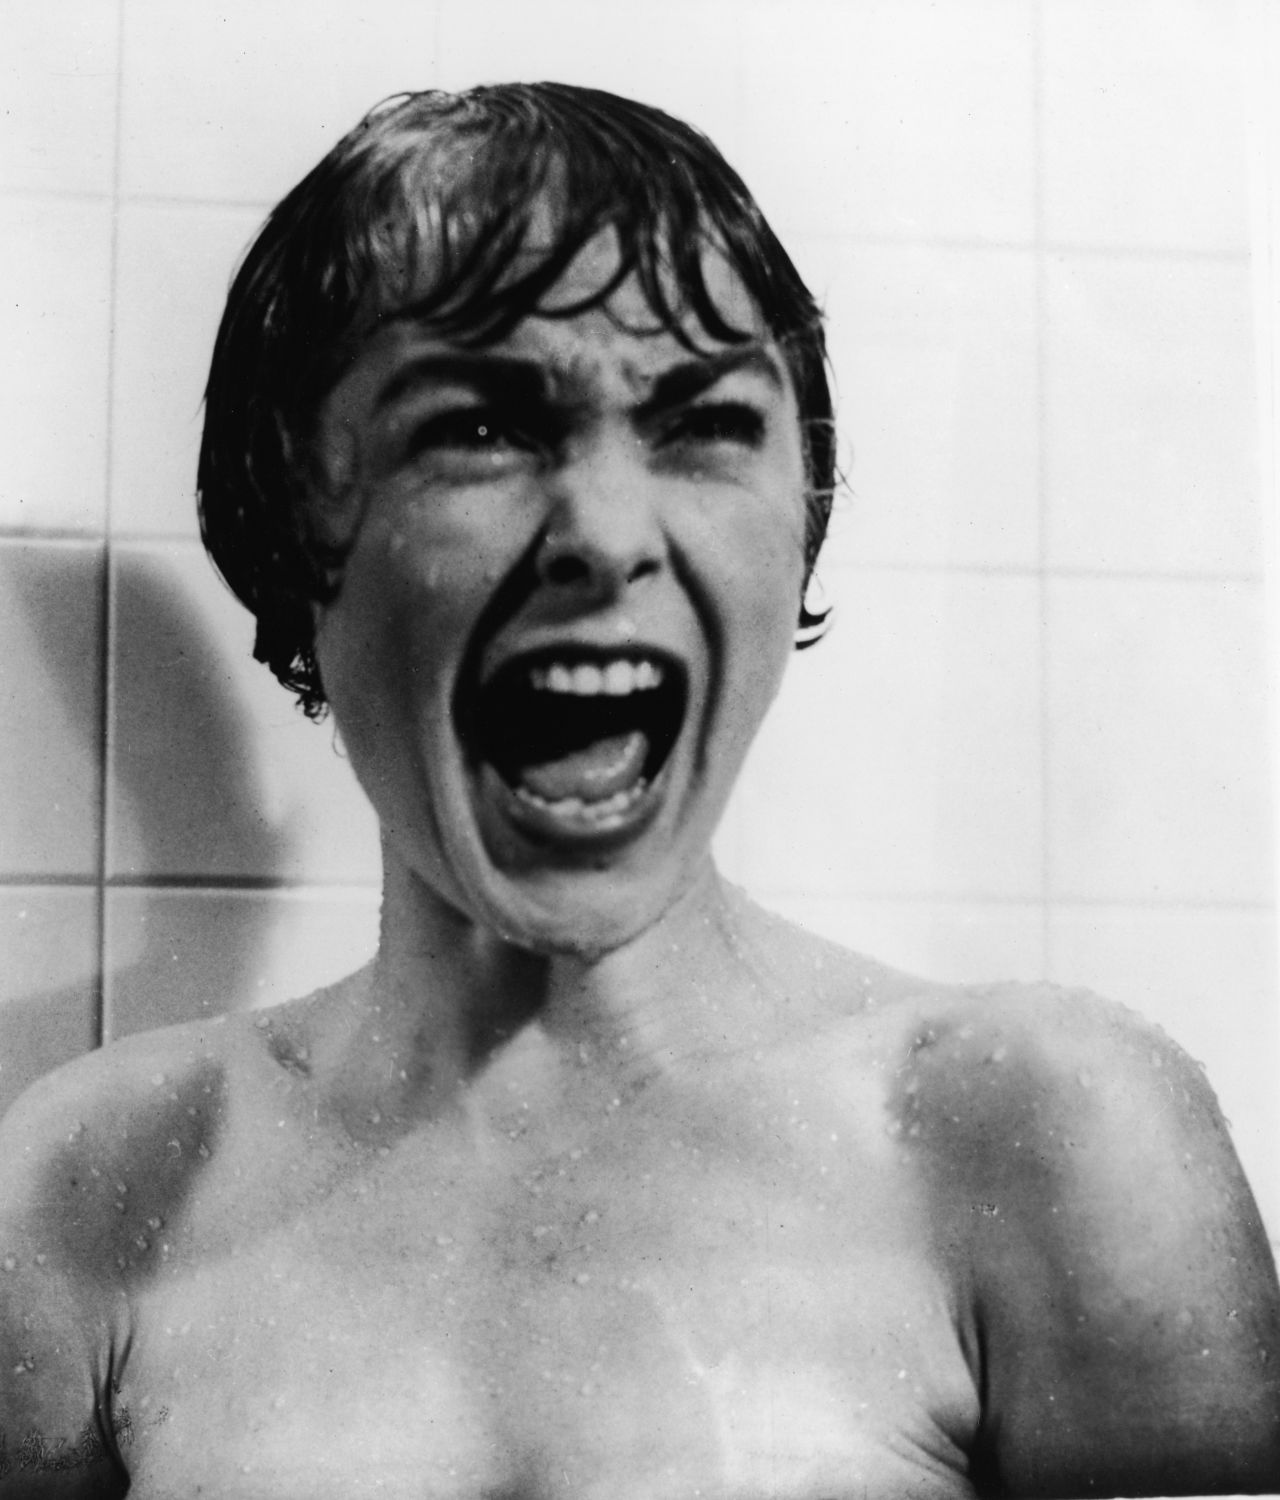 Janet Leigh's  screams in the<a href="https://www.youtube.com/watch?v=bT7a8Gv9qdA" target="_blank" target="_blank"> famous shower scene</a> from the film "Psycho" are often cited as the most frightening put on the silver screen. The 1960 film was directed by Alfred Hitchcock.